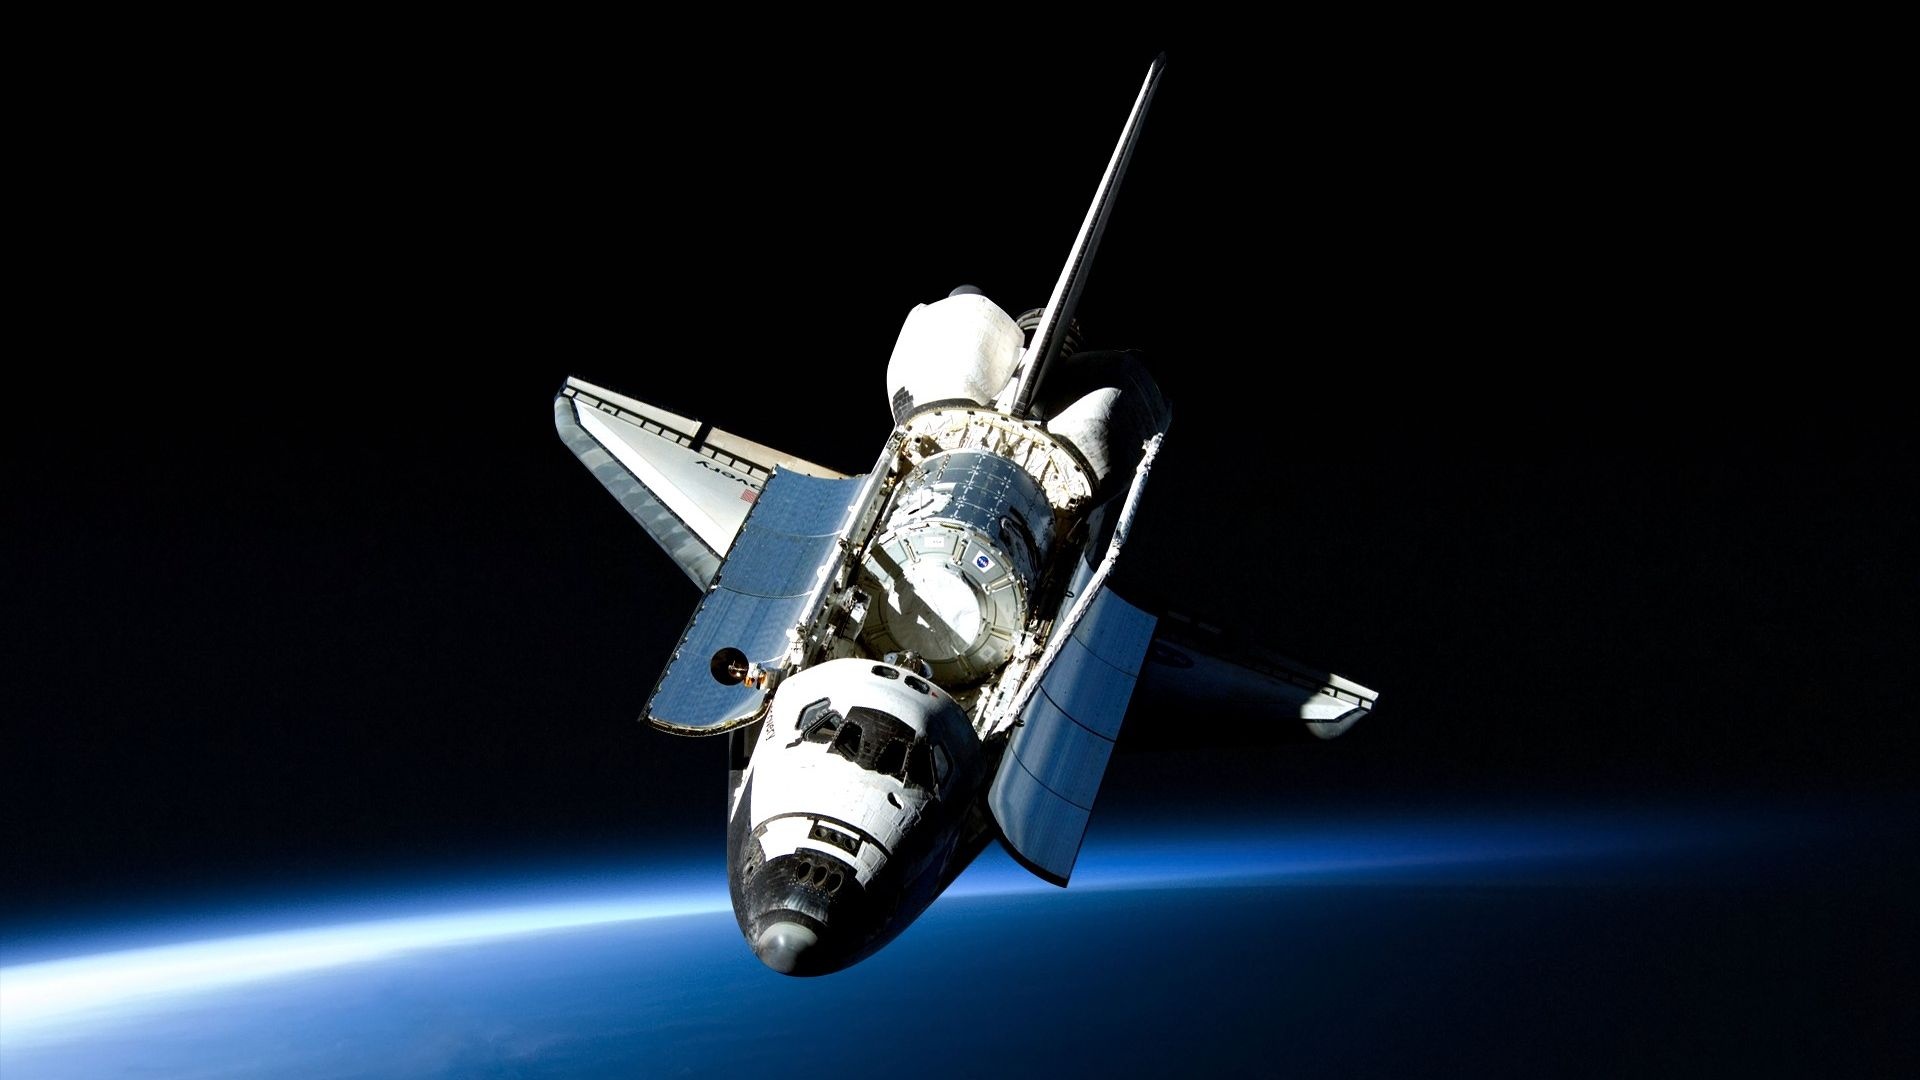 Spacecraft: Shuttle, Partially reusable low Earth orbital system. 1920x1080 Full HD Wallpaper.